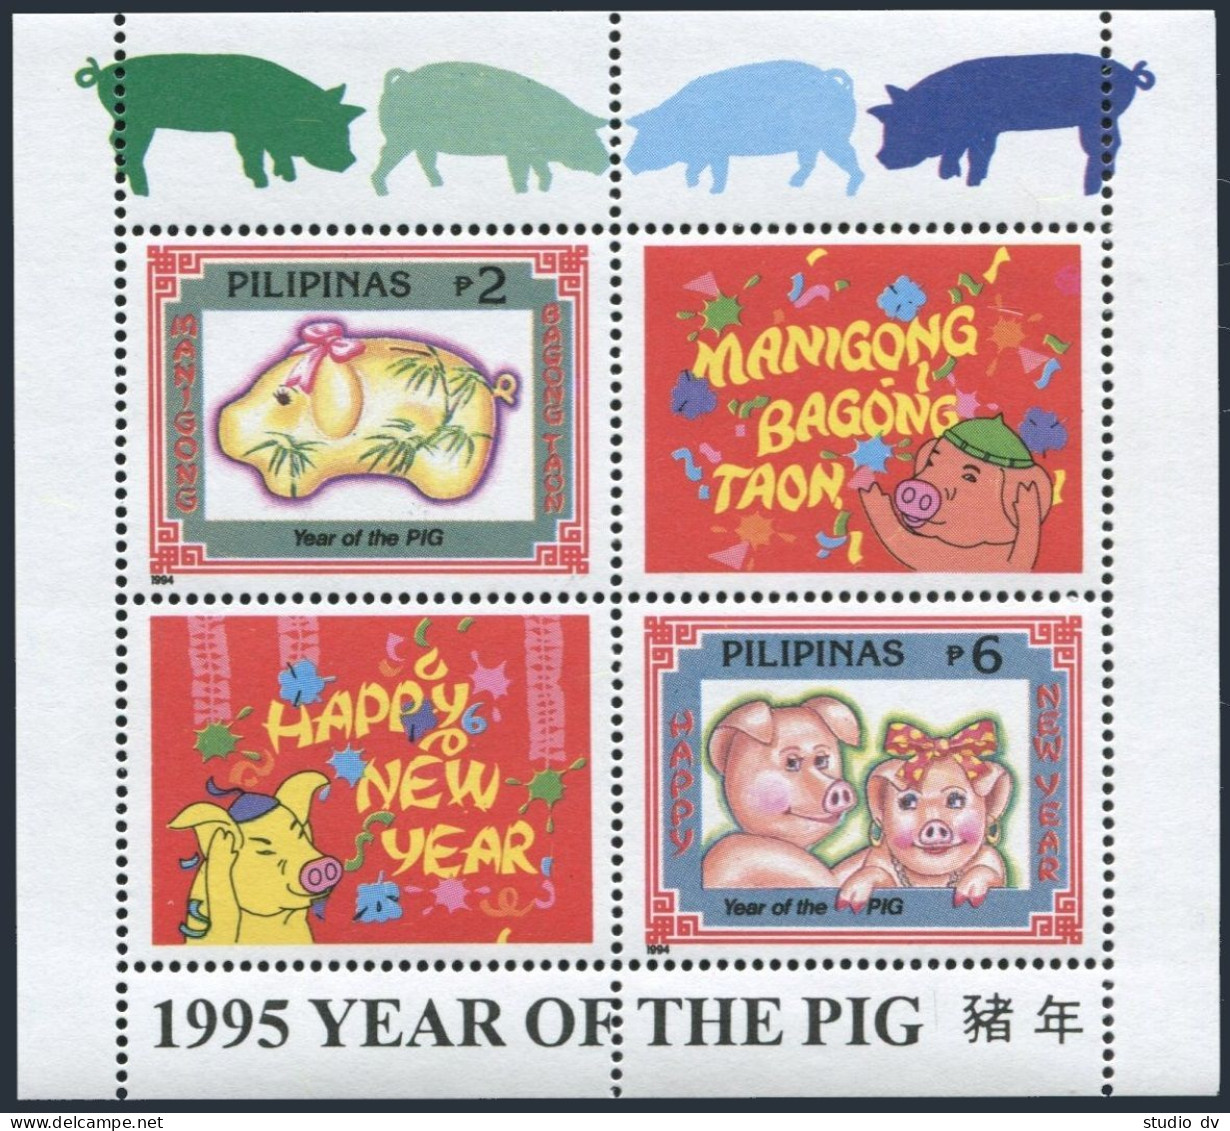 Philippines 2338a, 2338a Imperf, MNH. New Year 1995 - Lunar Year Of The Boar. - Filippine